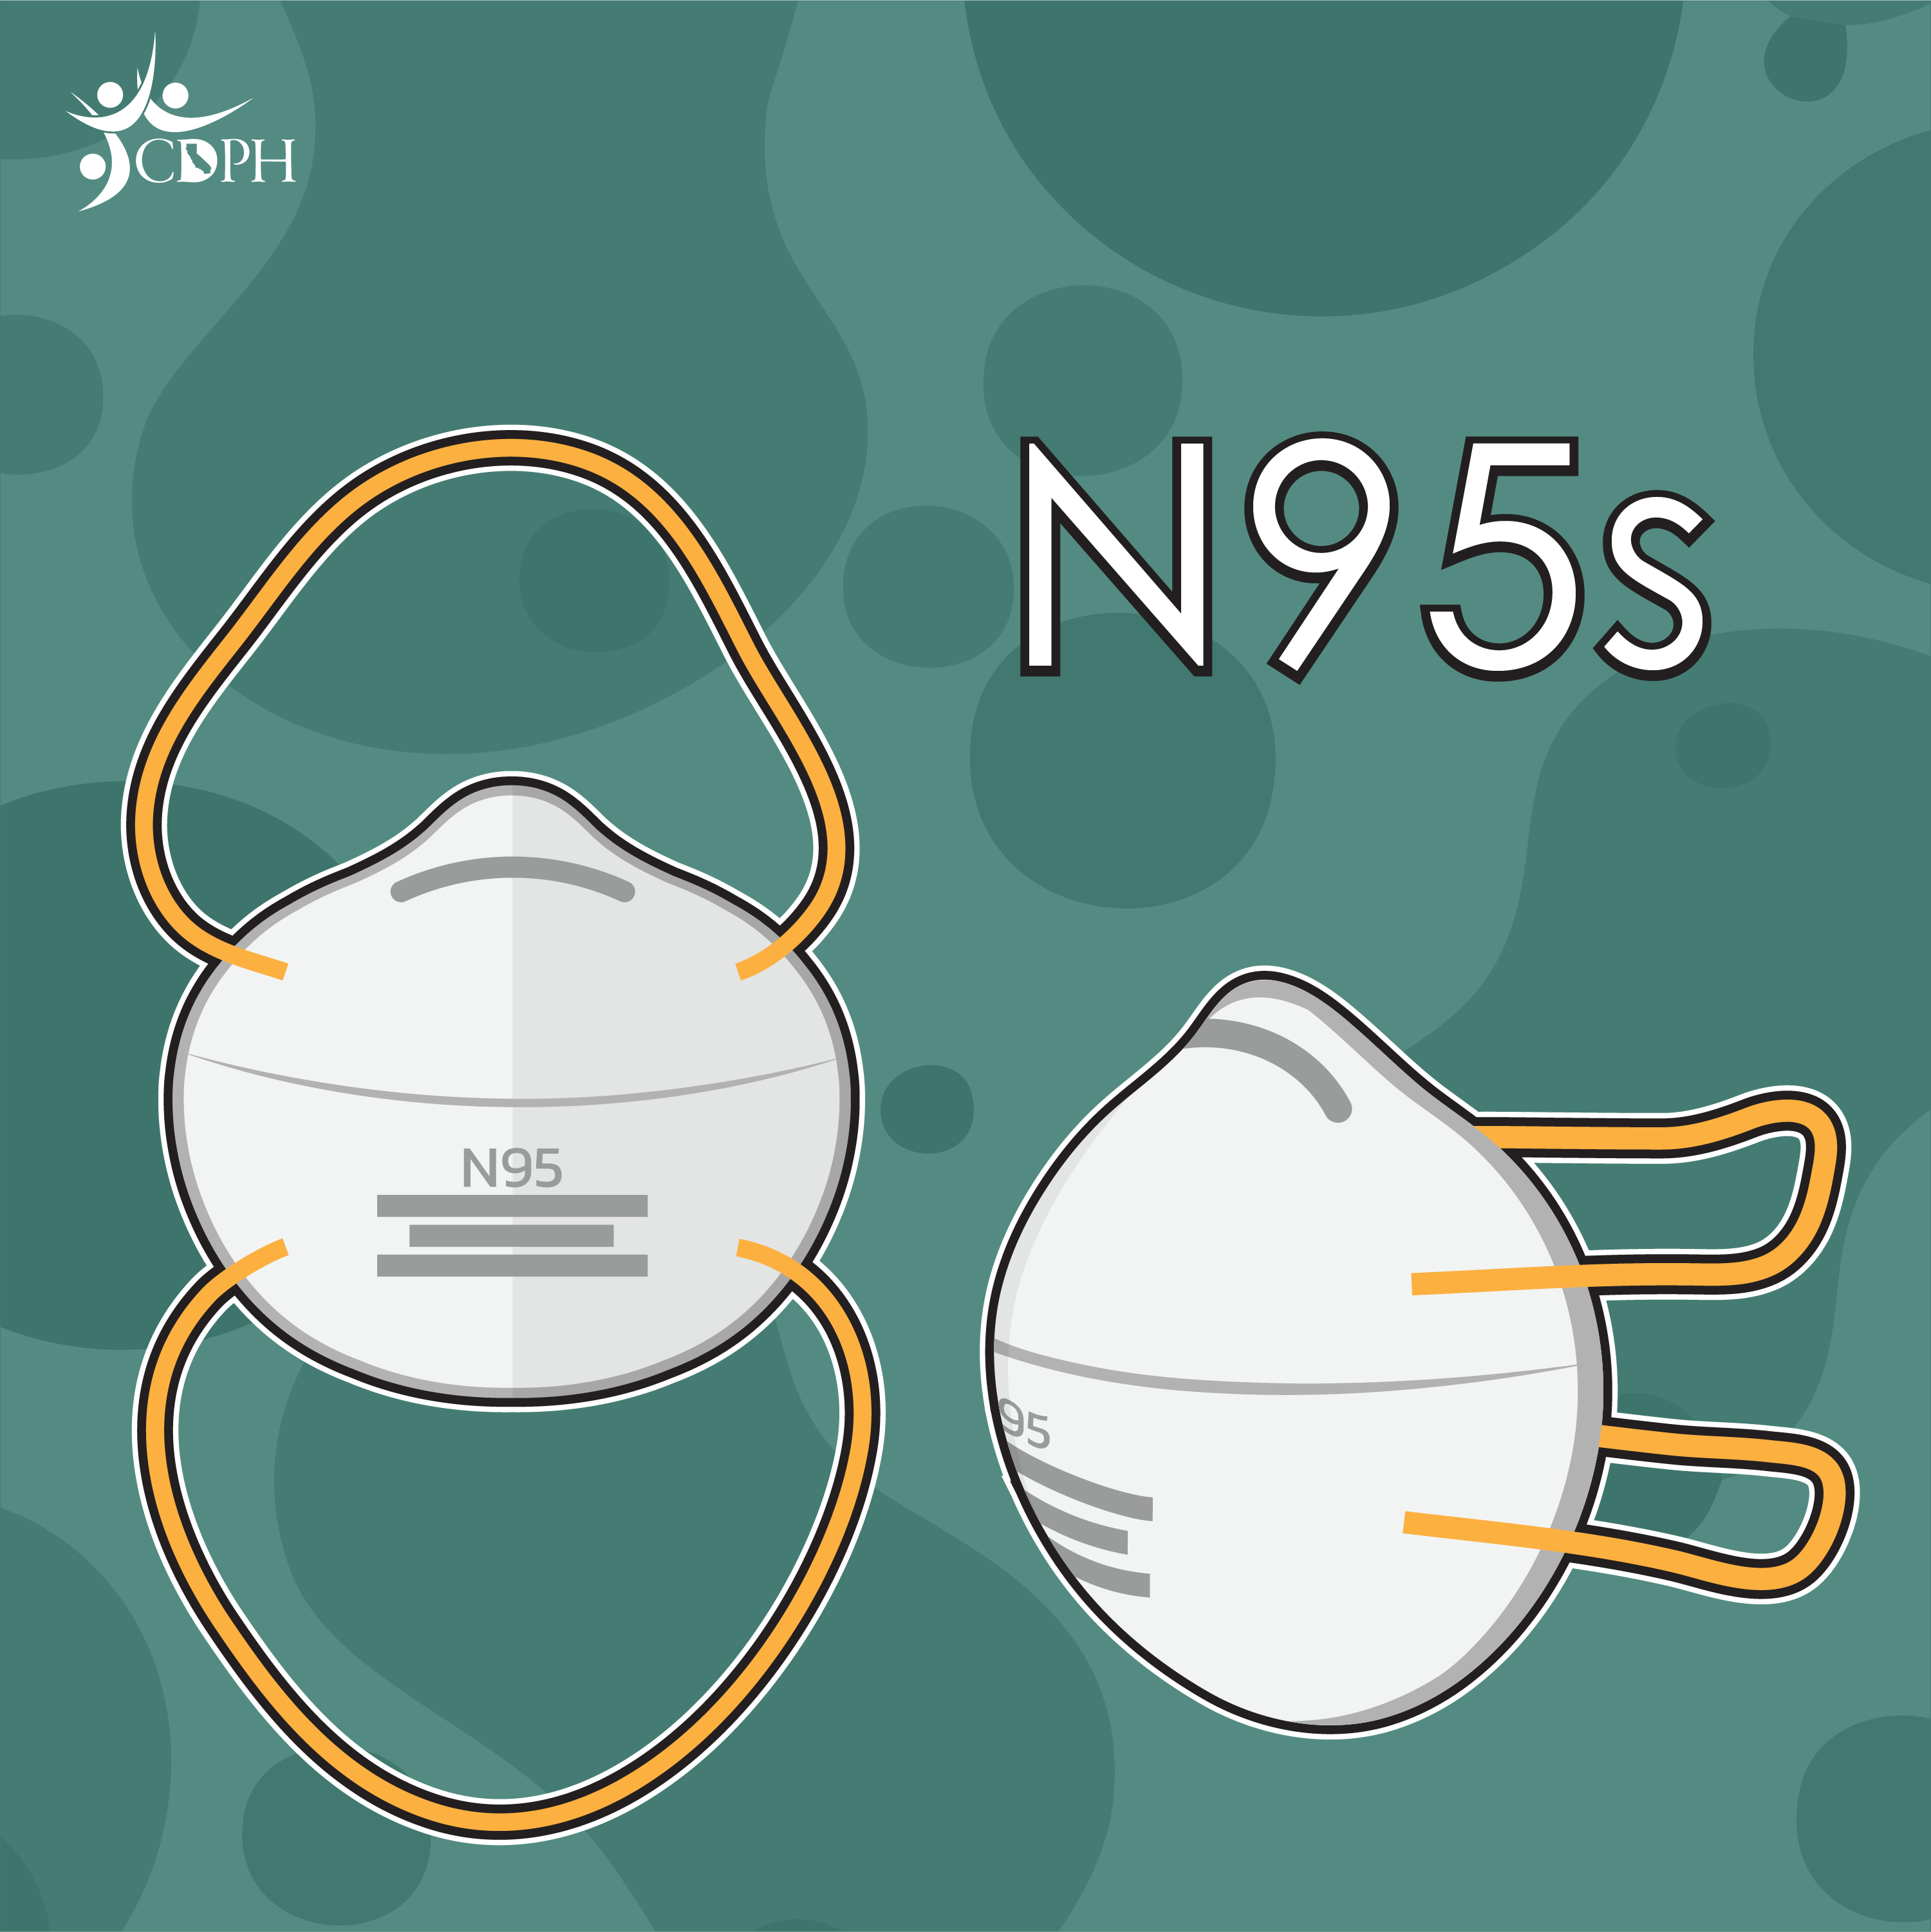 N95s mask picture